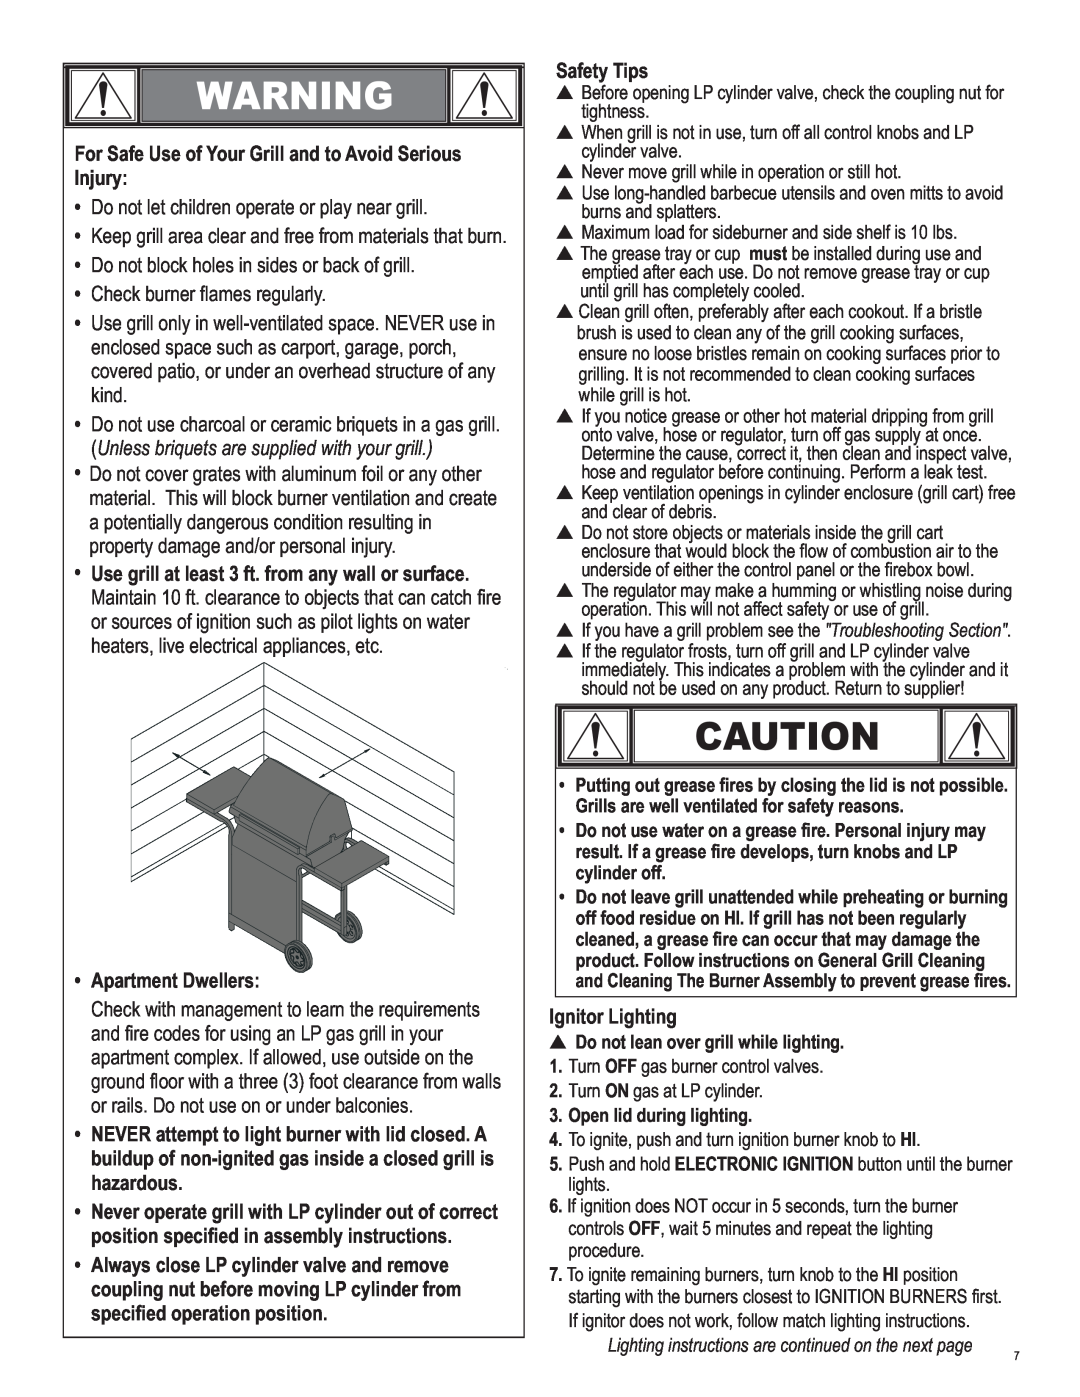 Char-Broil 463247412 manual For Safe Use of Your Grill and to Avoid Serious Injury 